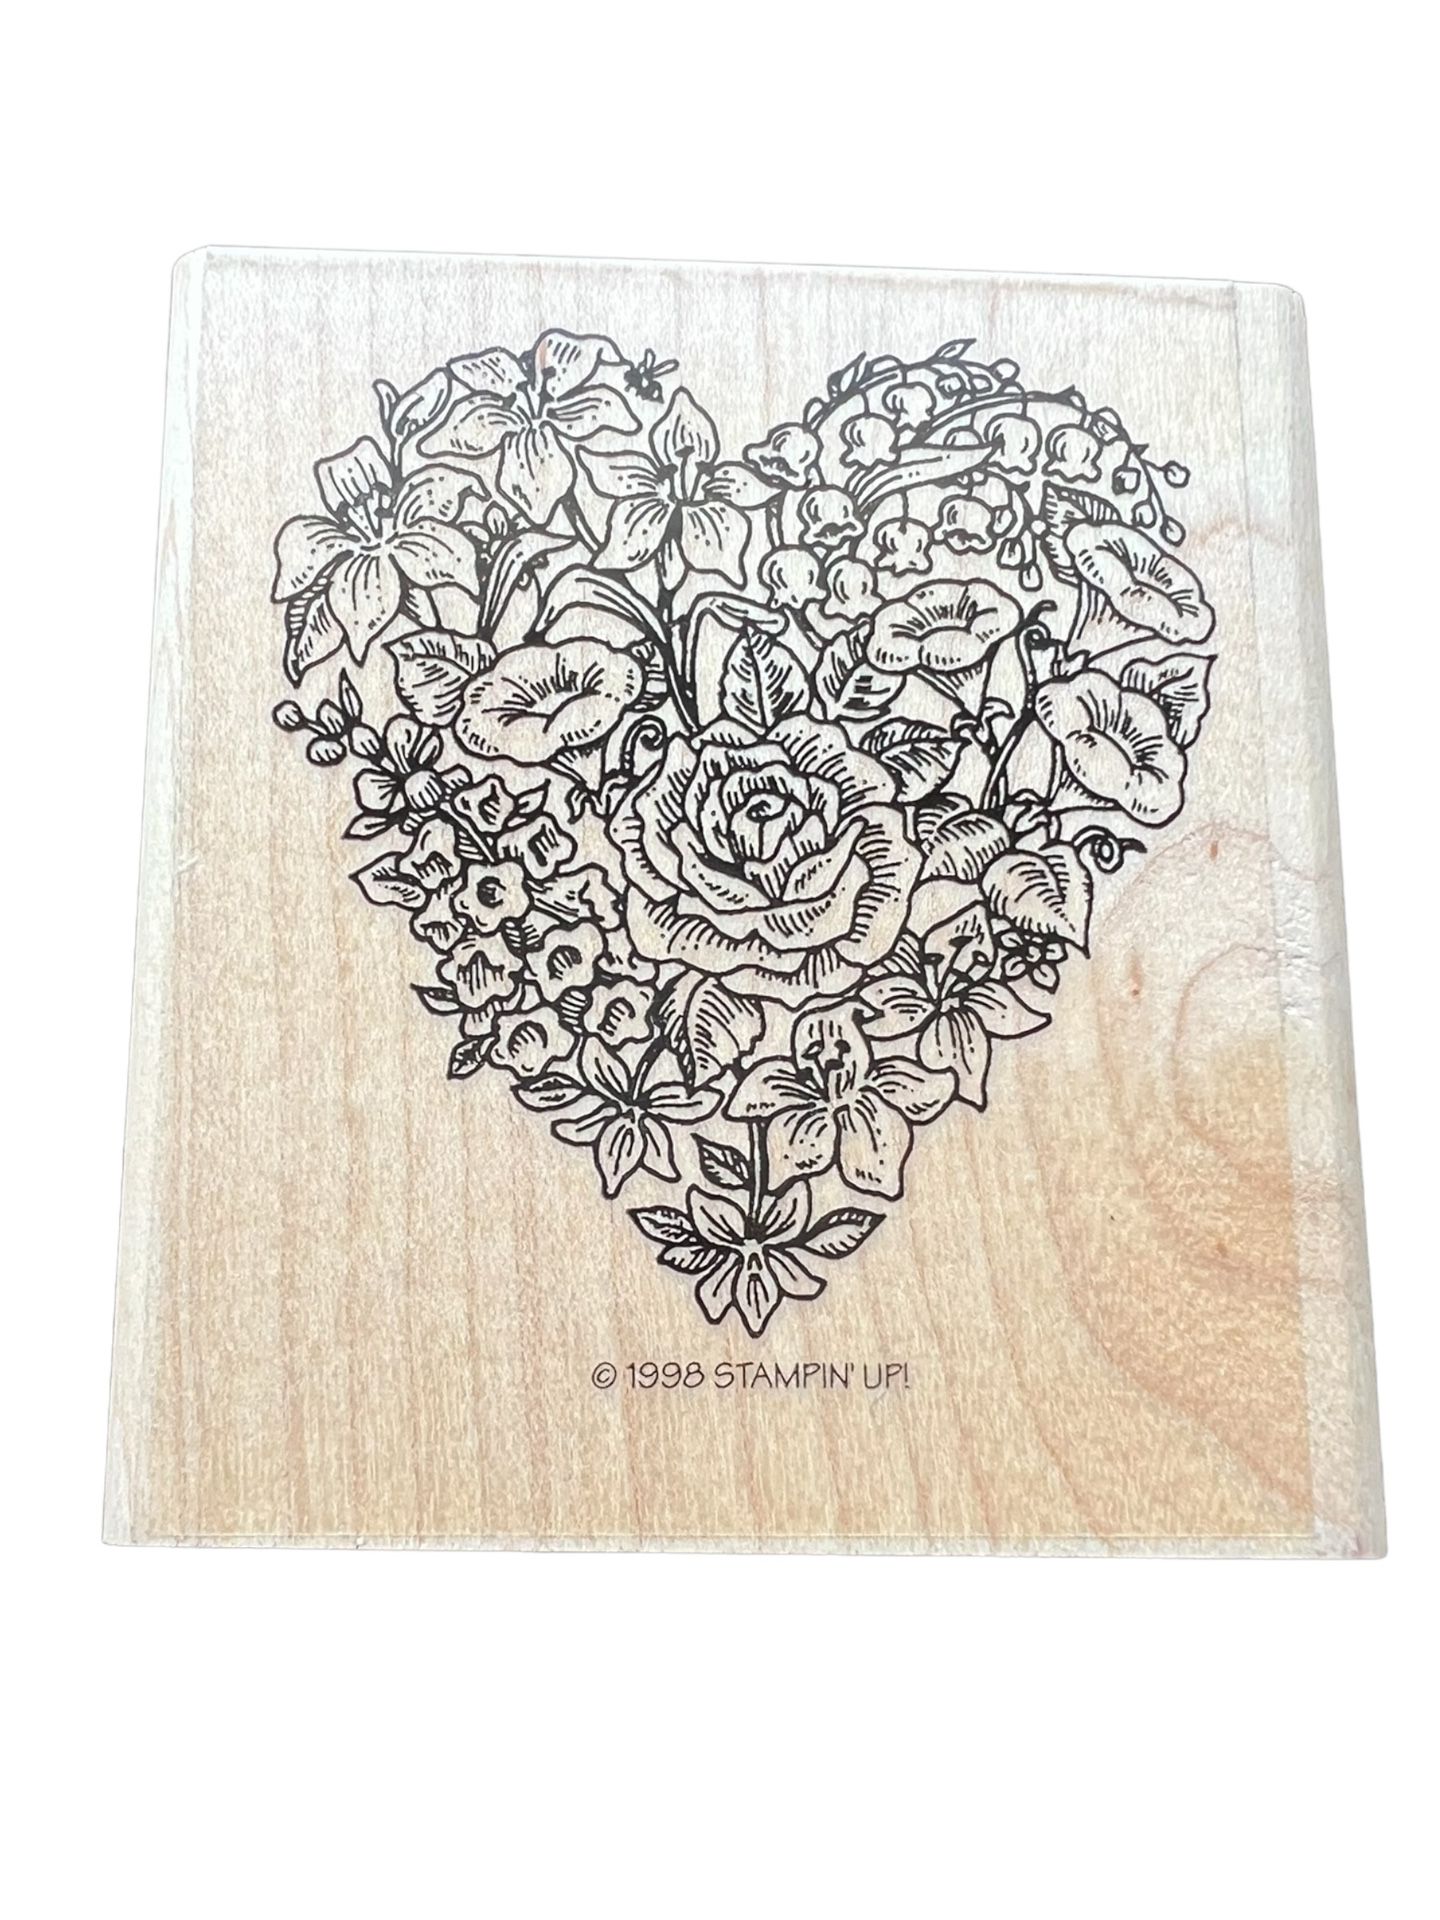 One Retired Stampin' Up! Wood Mounted Rubber Stamp 1998 "FLORAL HEART" Vintage  Add a touch of vintage charm to your crafting collection with this one